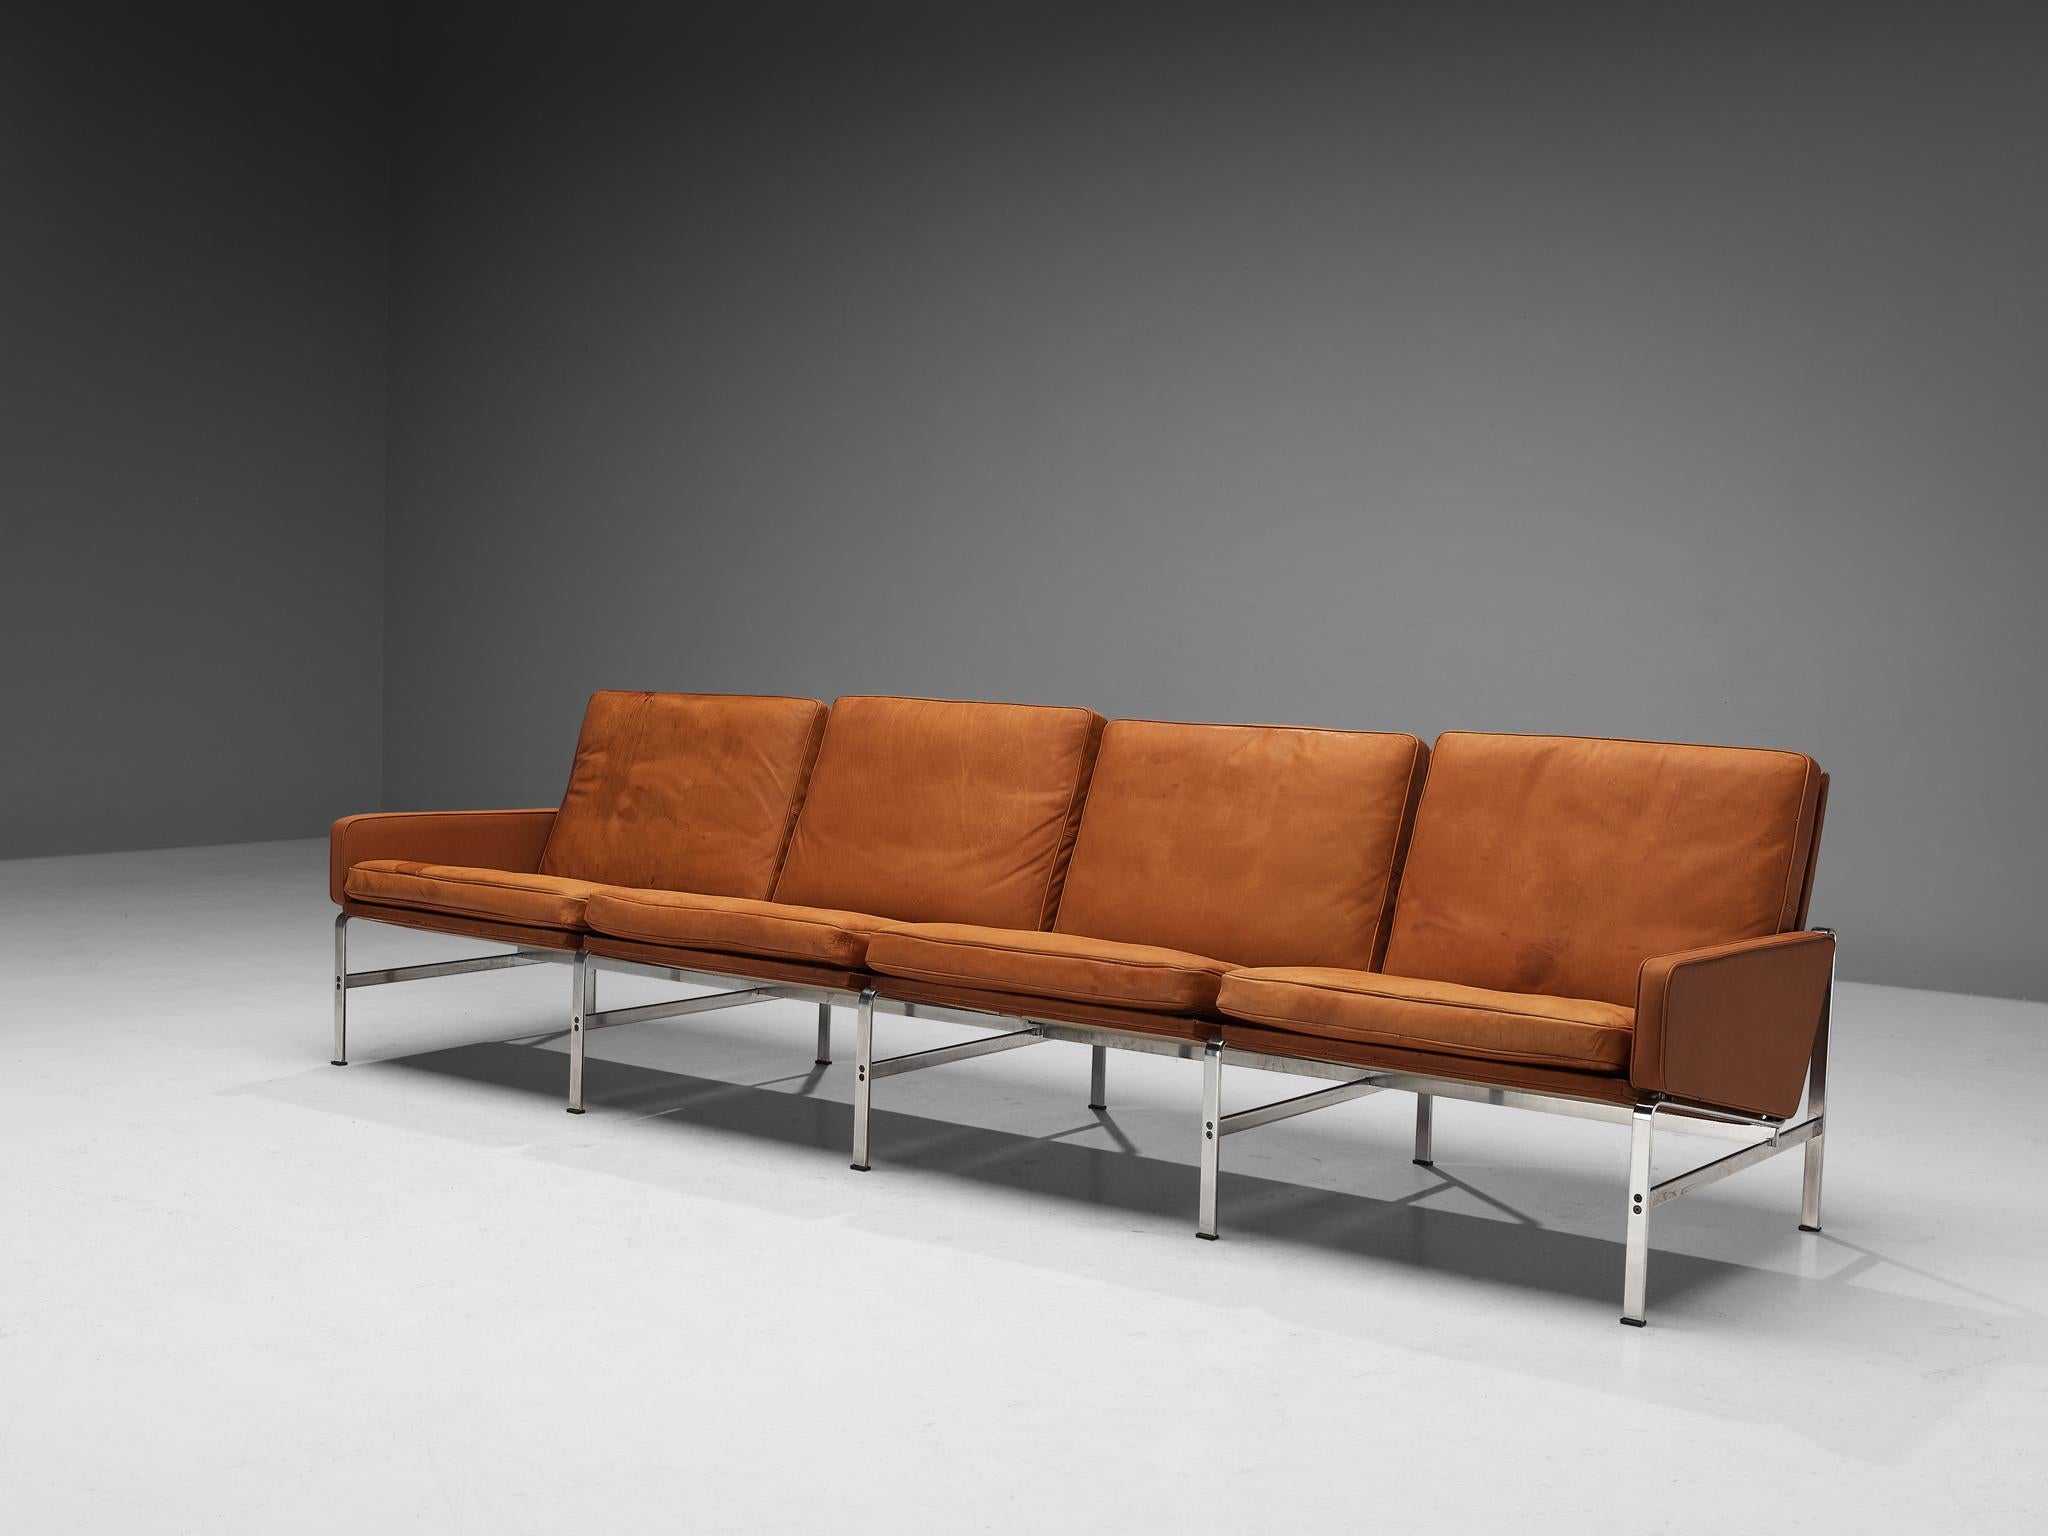 Jørgen Kastholm & Preben Fabricius for Kill International, four-seater sofa, patinated leather, steel, Denmark, 1960s.

This sofa embodies a solid construction that is established by clear, sharp lines and vivid geometrical shapes. The way the steel